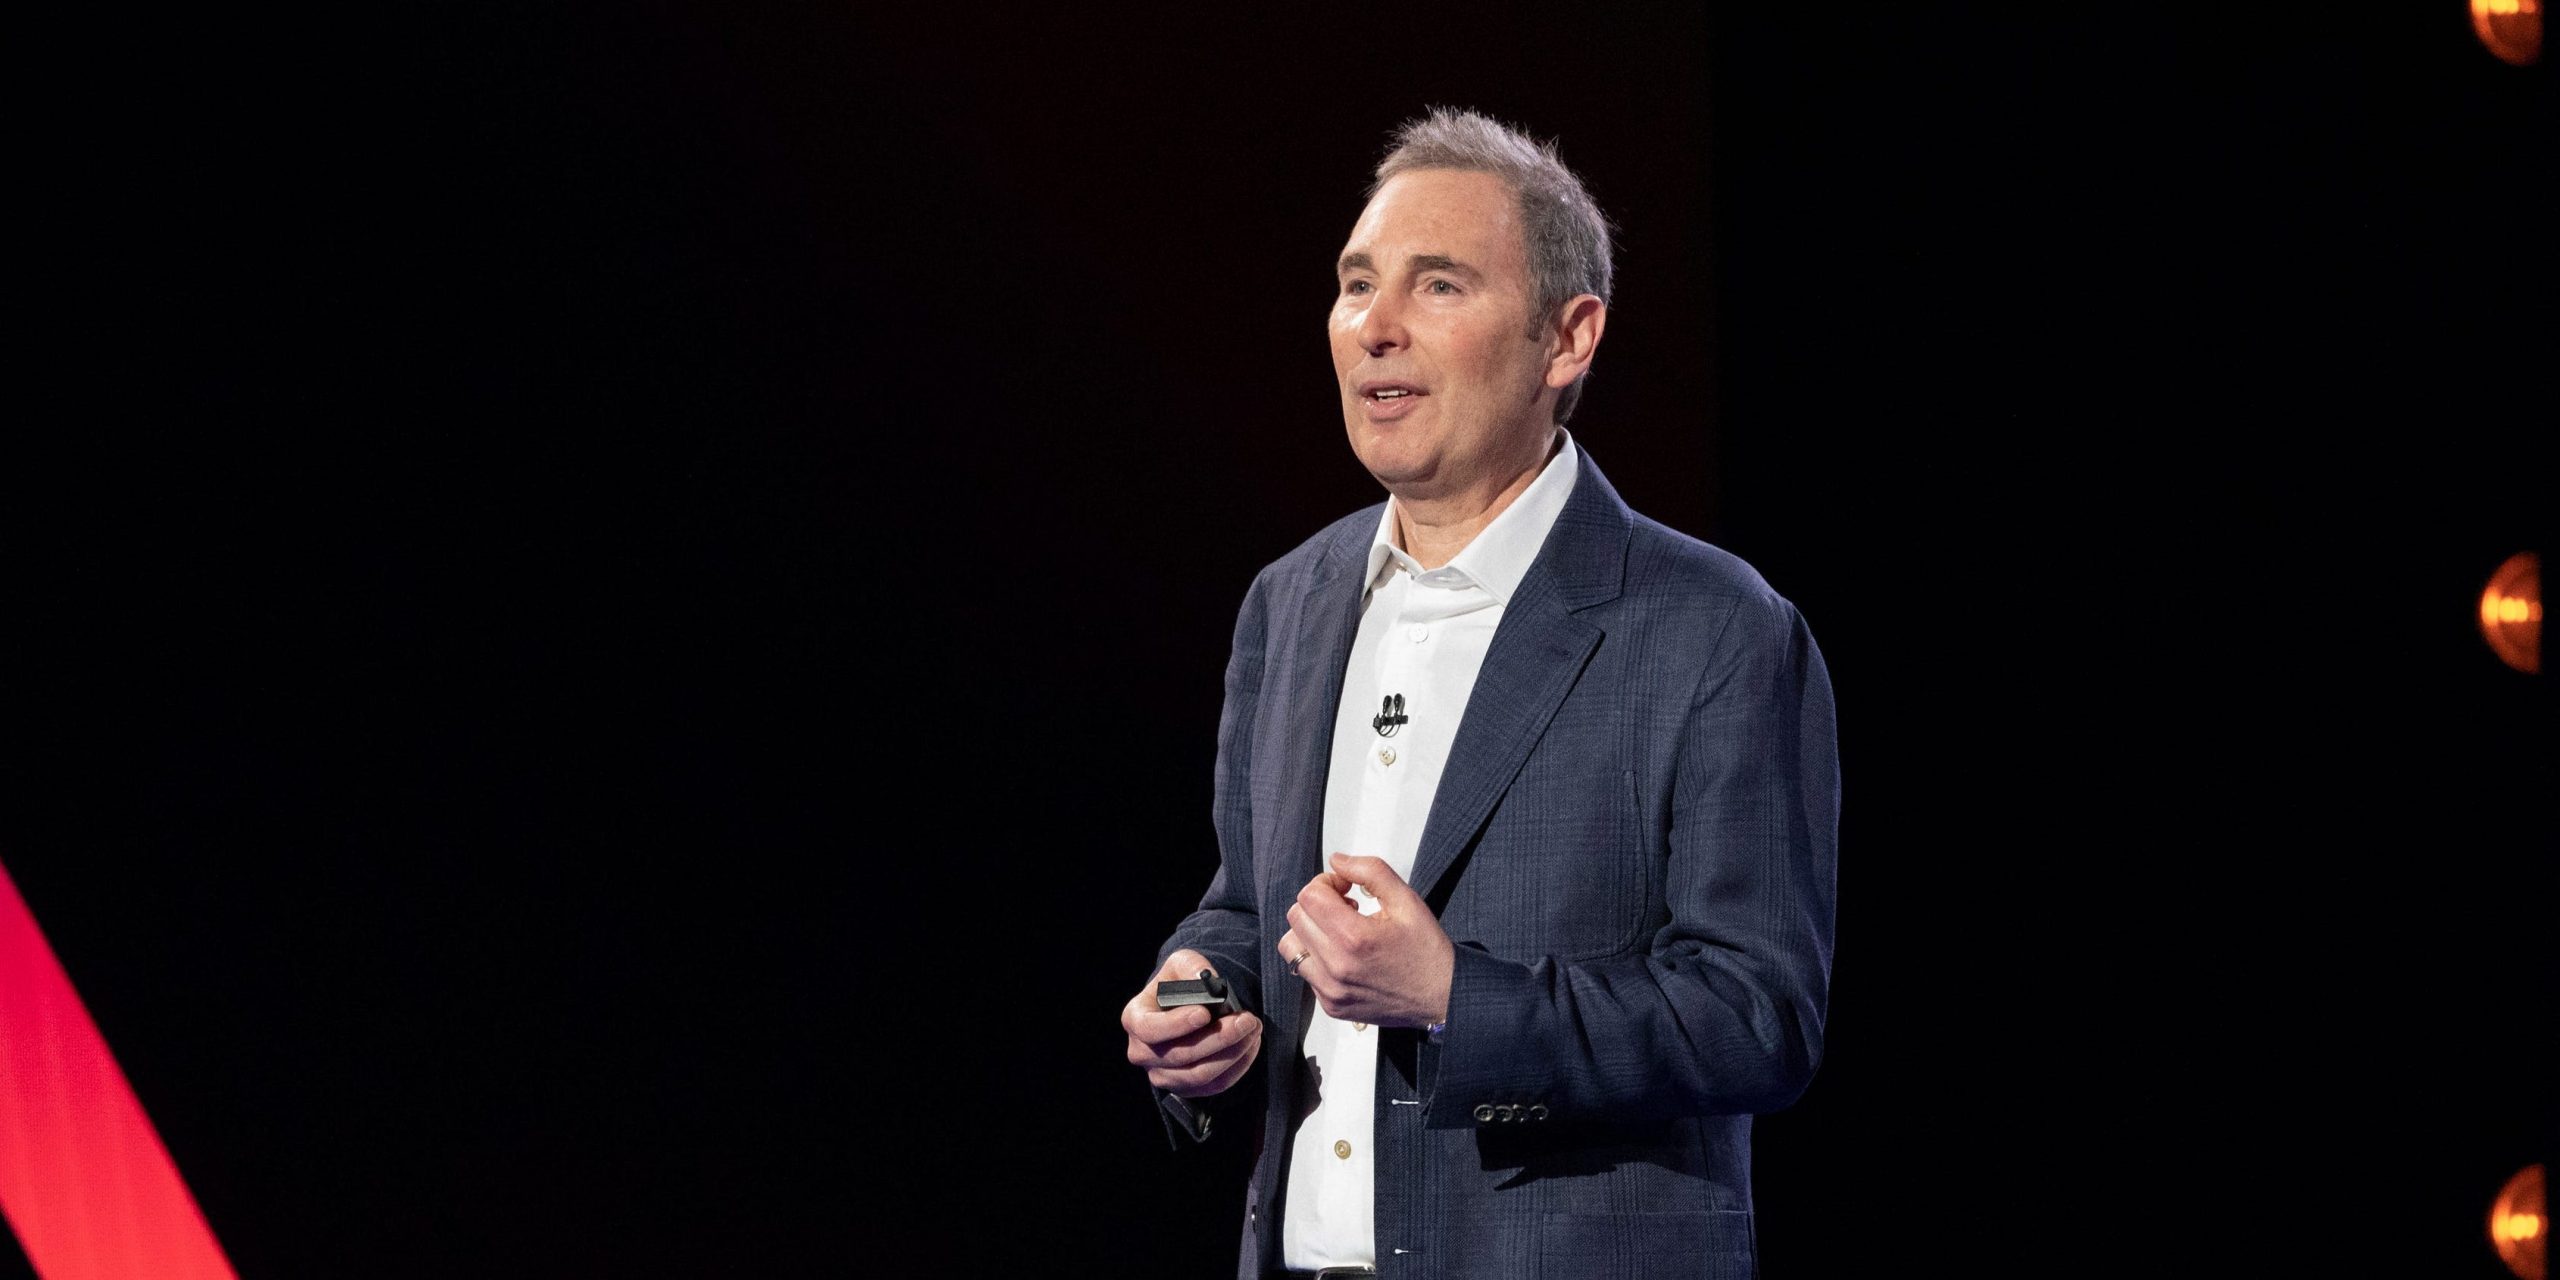 Amazon Web Services CEO Andy Jassy gives a presentation onstage.